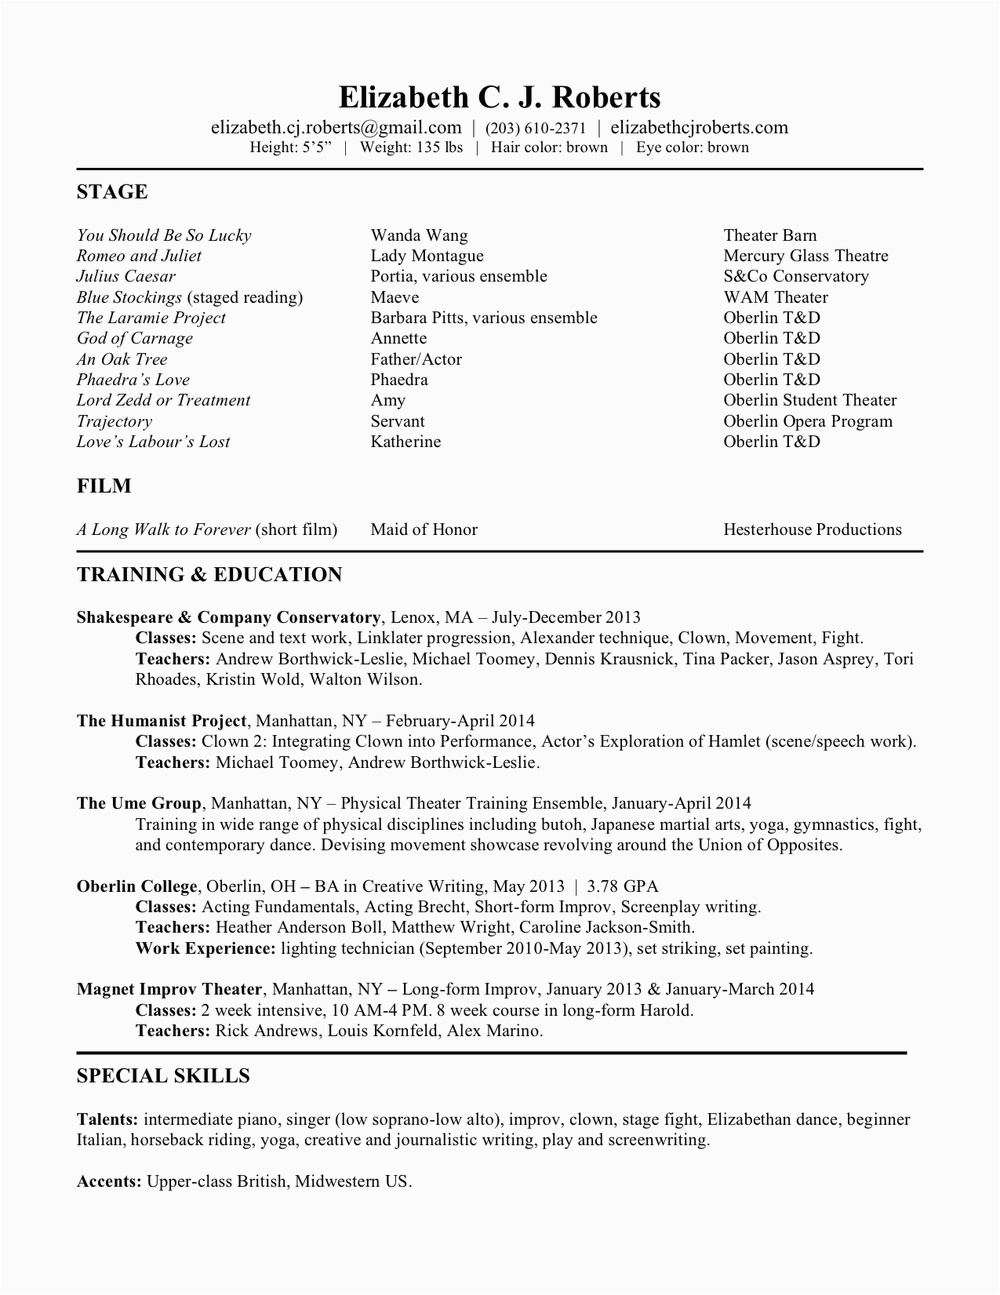 Resume Template References Available Upon Request Cv References Upon Request